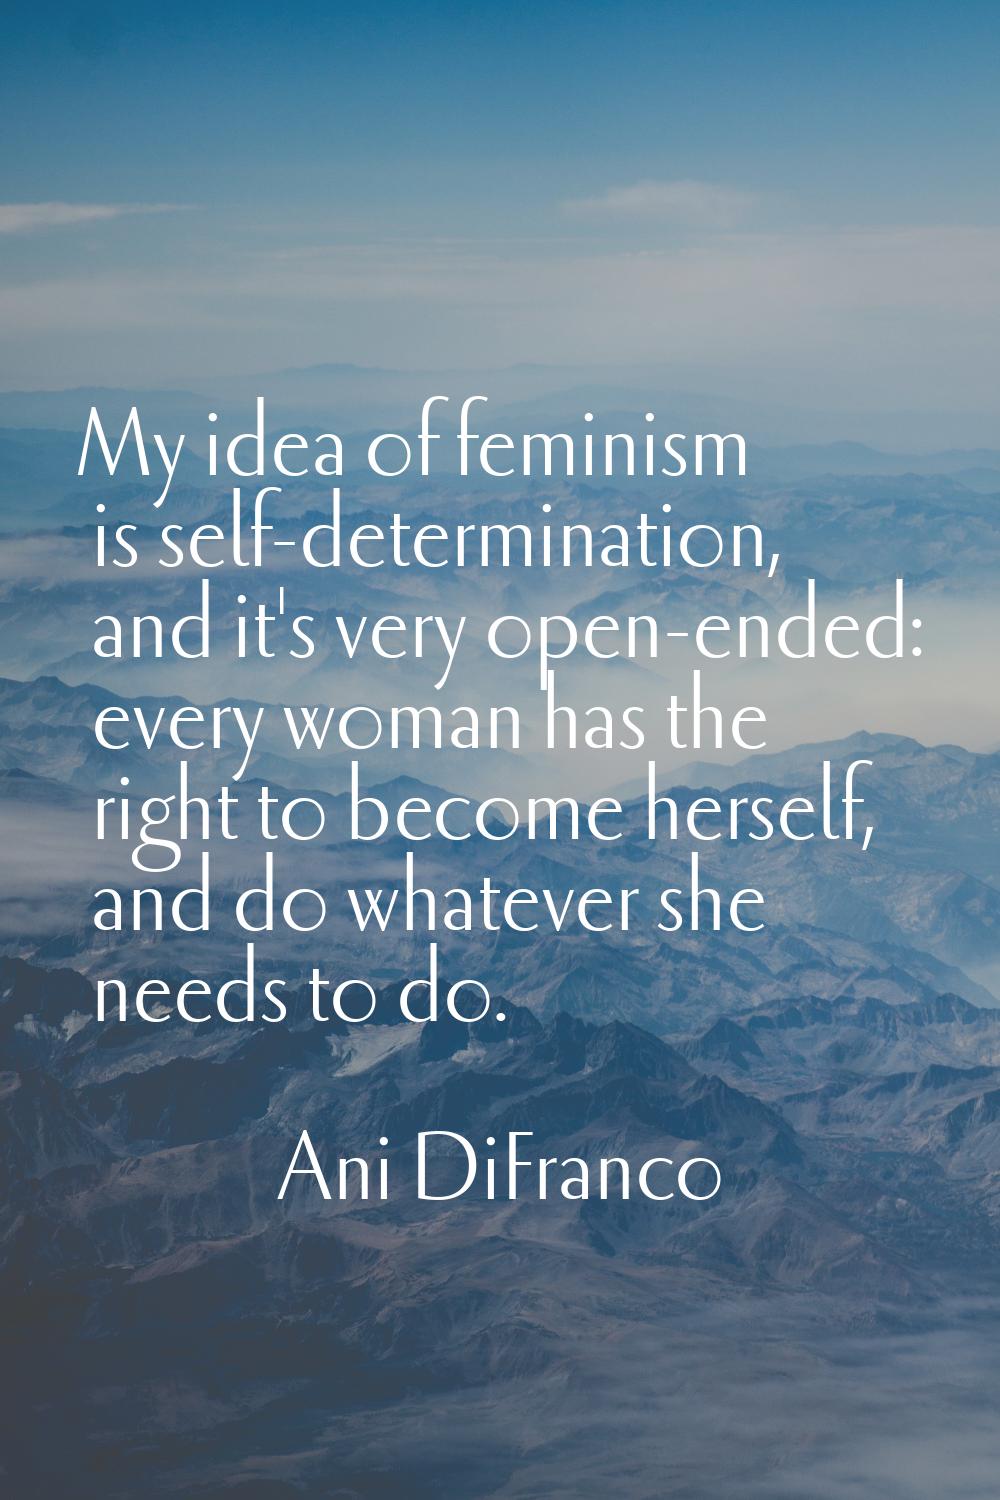 My idea of feminism is self-determination, and it's very open-ended: every woman has the right to b